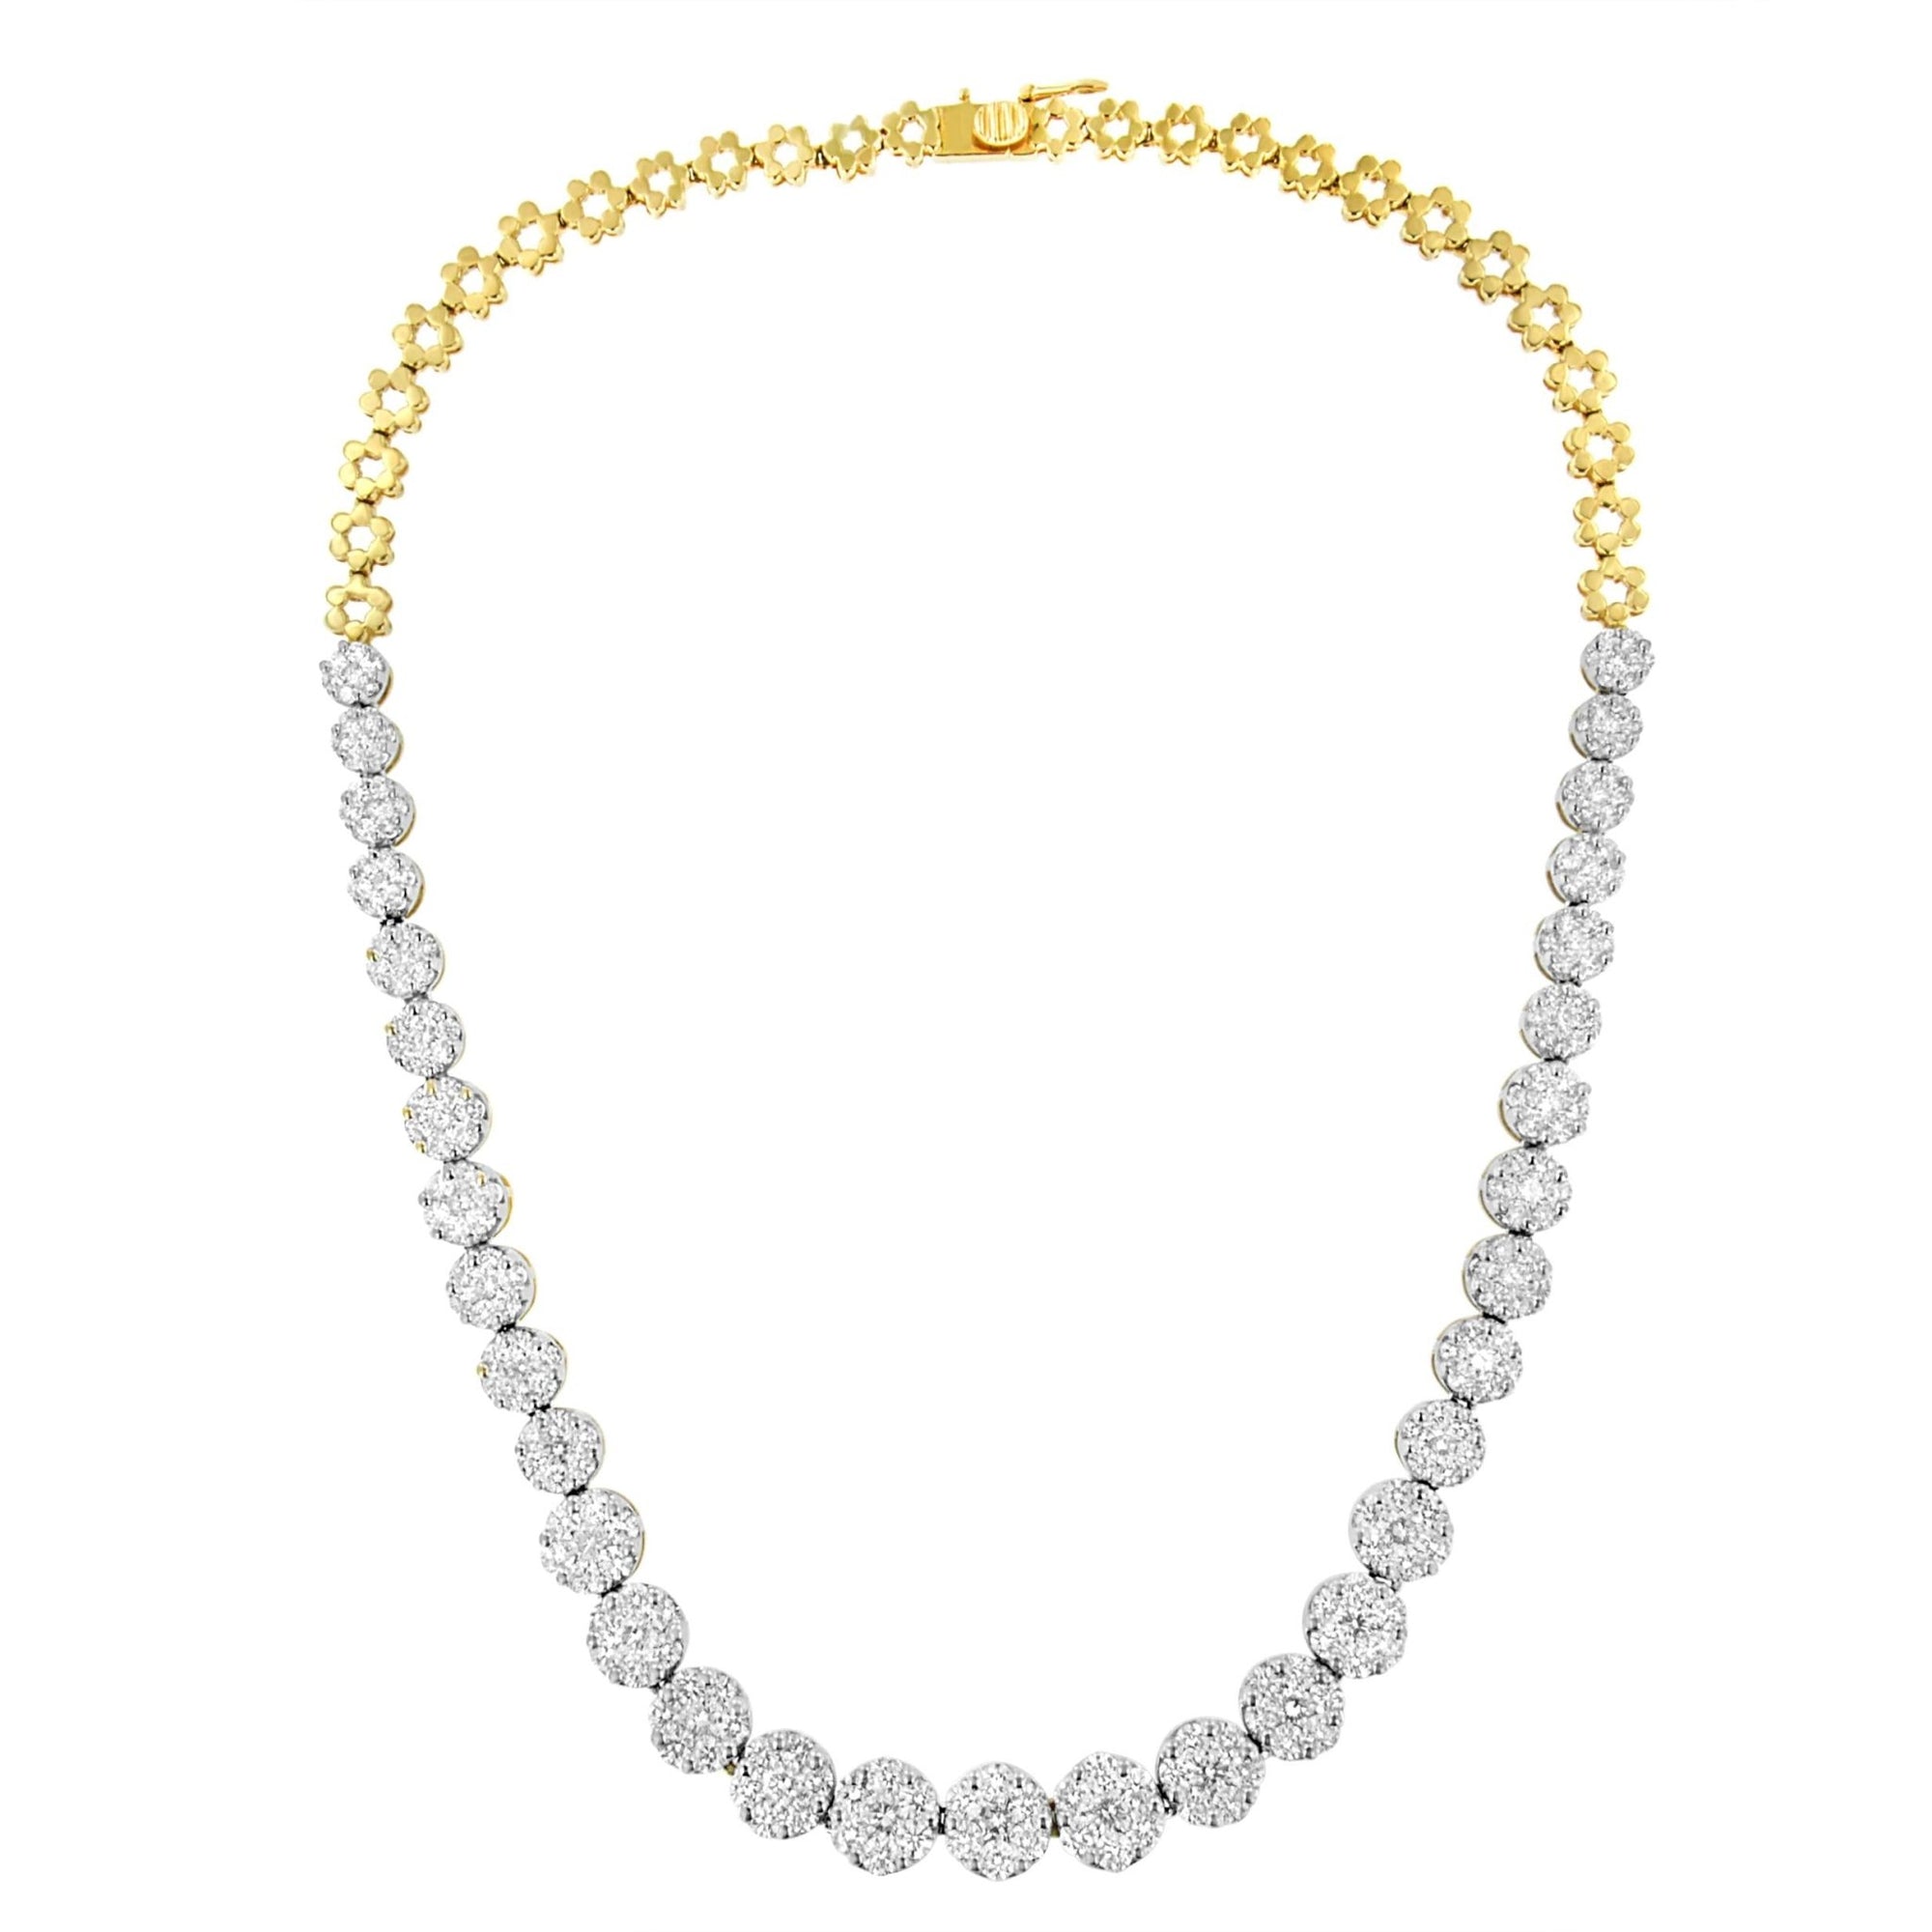 IGI Certified 14K Yellow Gold 14 3/4 cttw Pave Set Round-Cut Diamond Riviera Necklace (F-G Color, S2-I1 Clarity) - LinkagejewelrydesignLinkagejewelrydesign